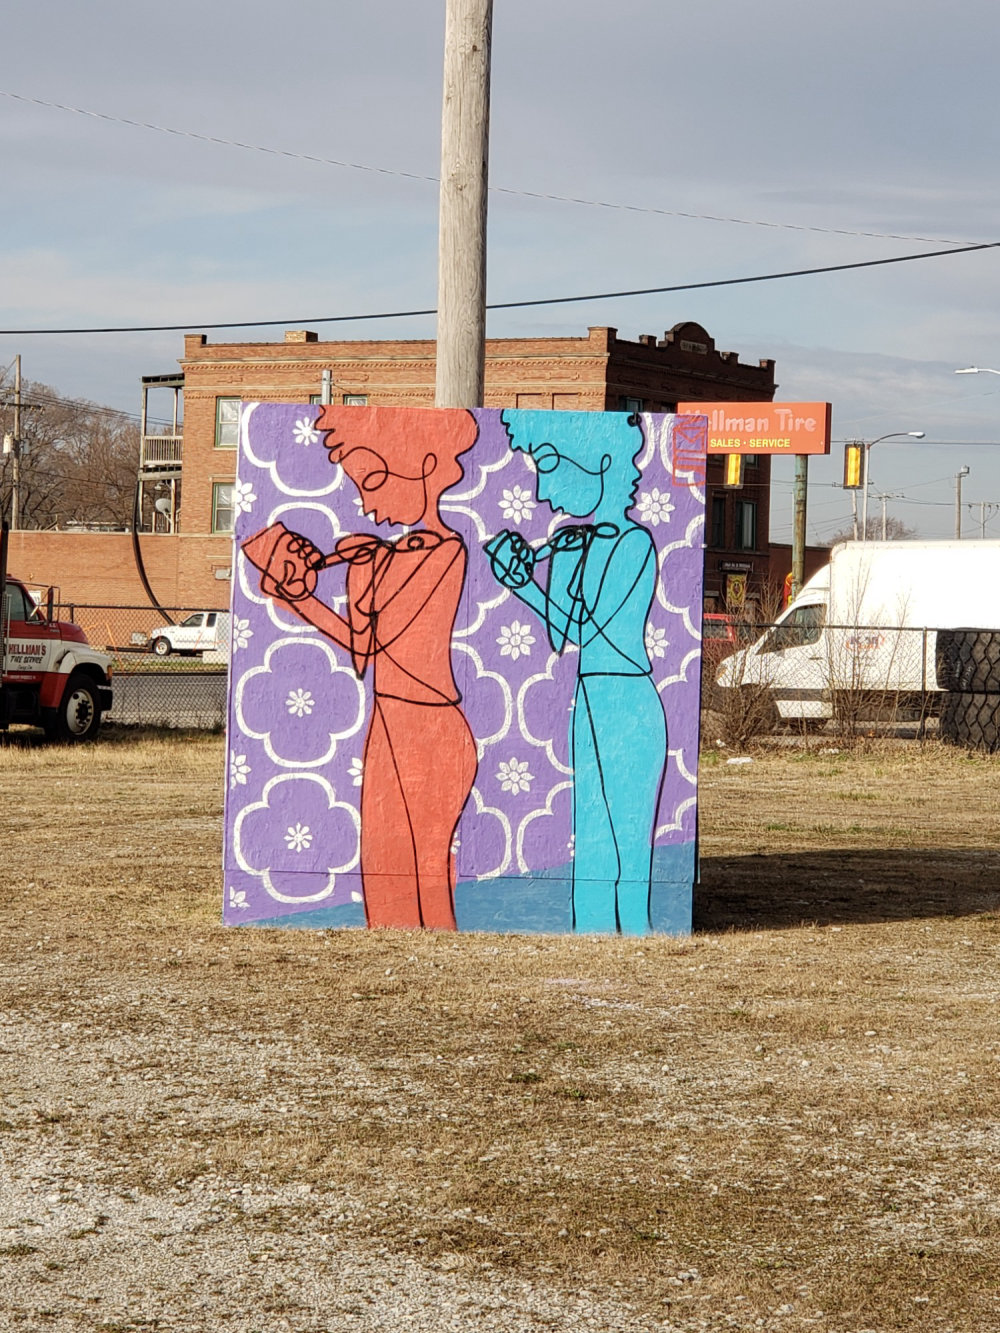 mural in Gary by artist unknown.